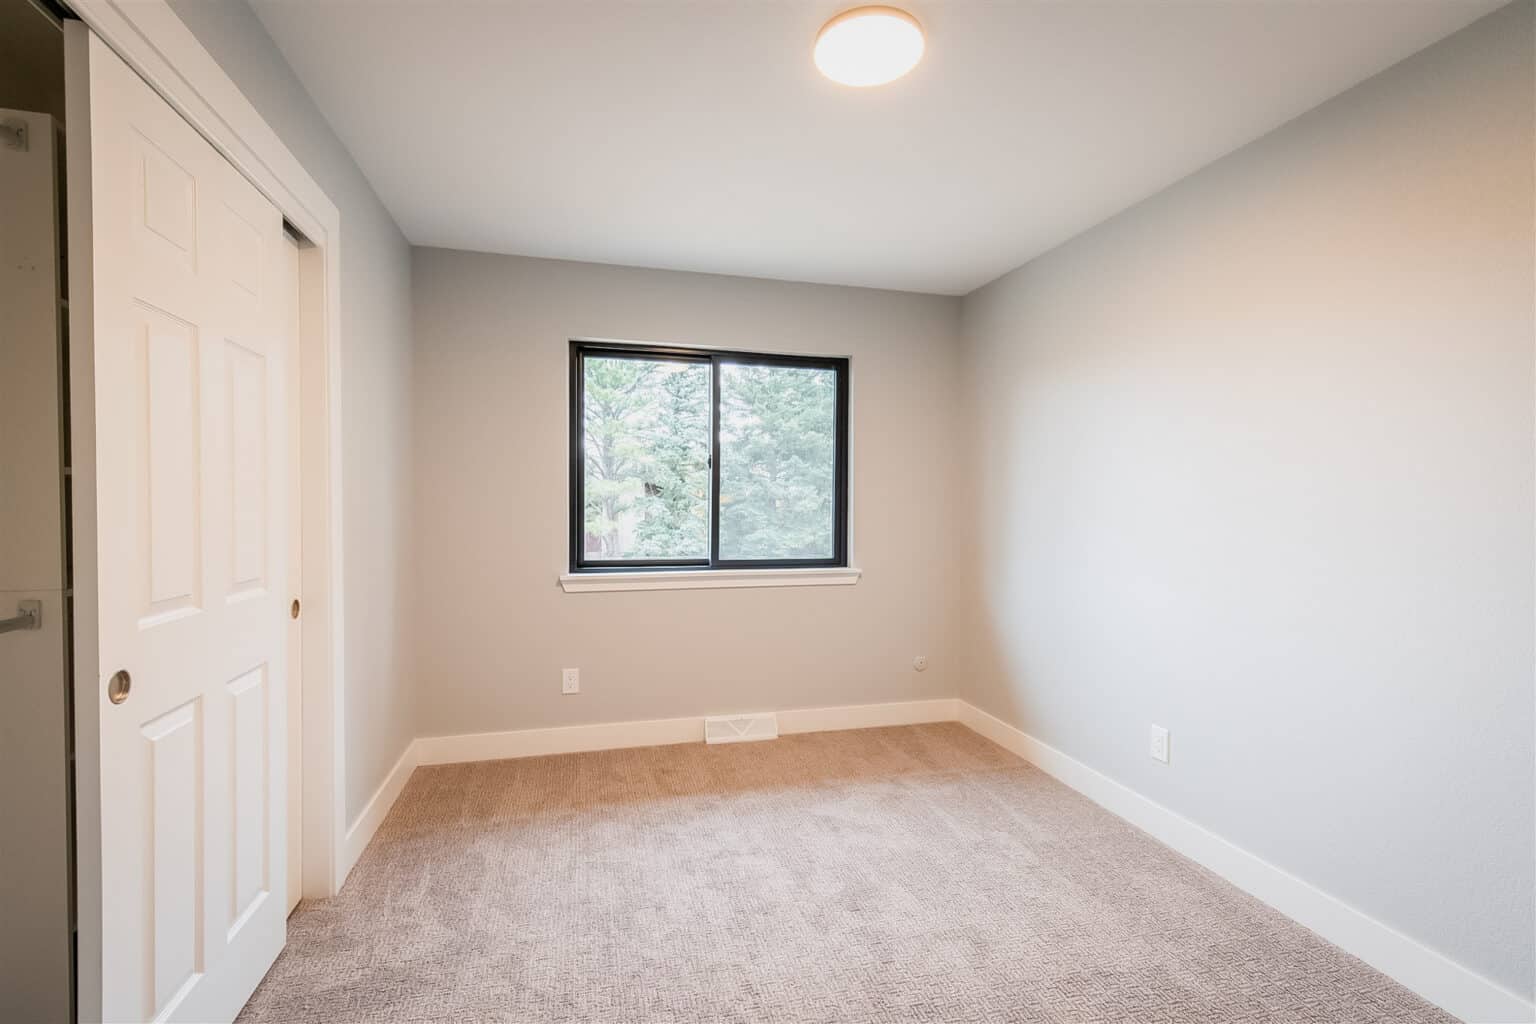 Newly remodeled room in a Colorado home with newly installed windows, flooring, and closets.